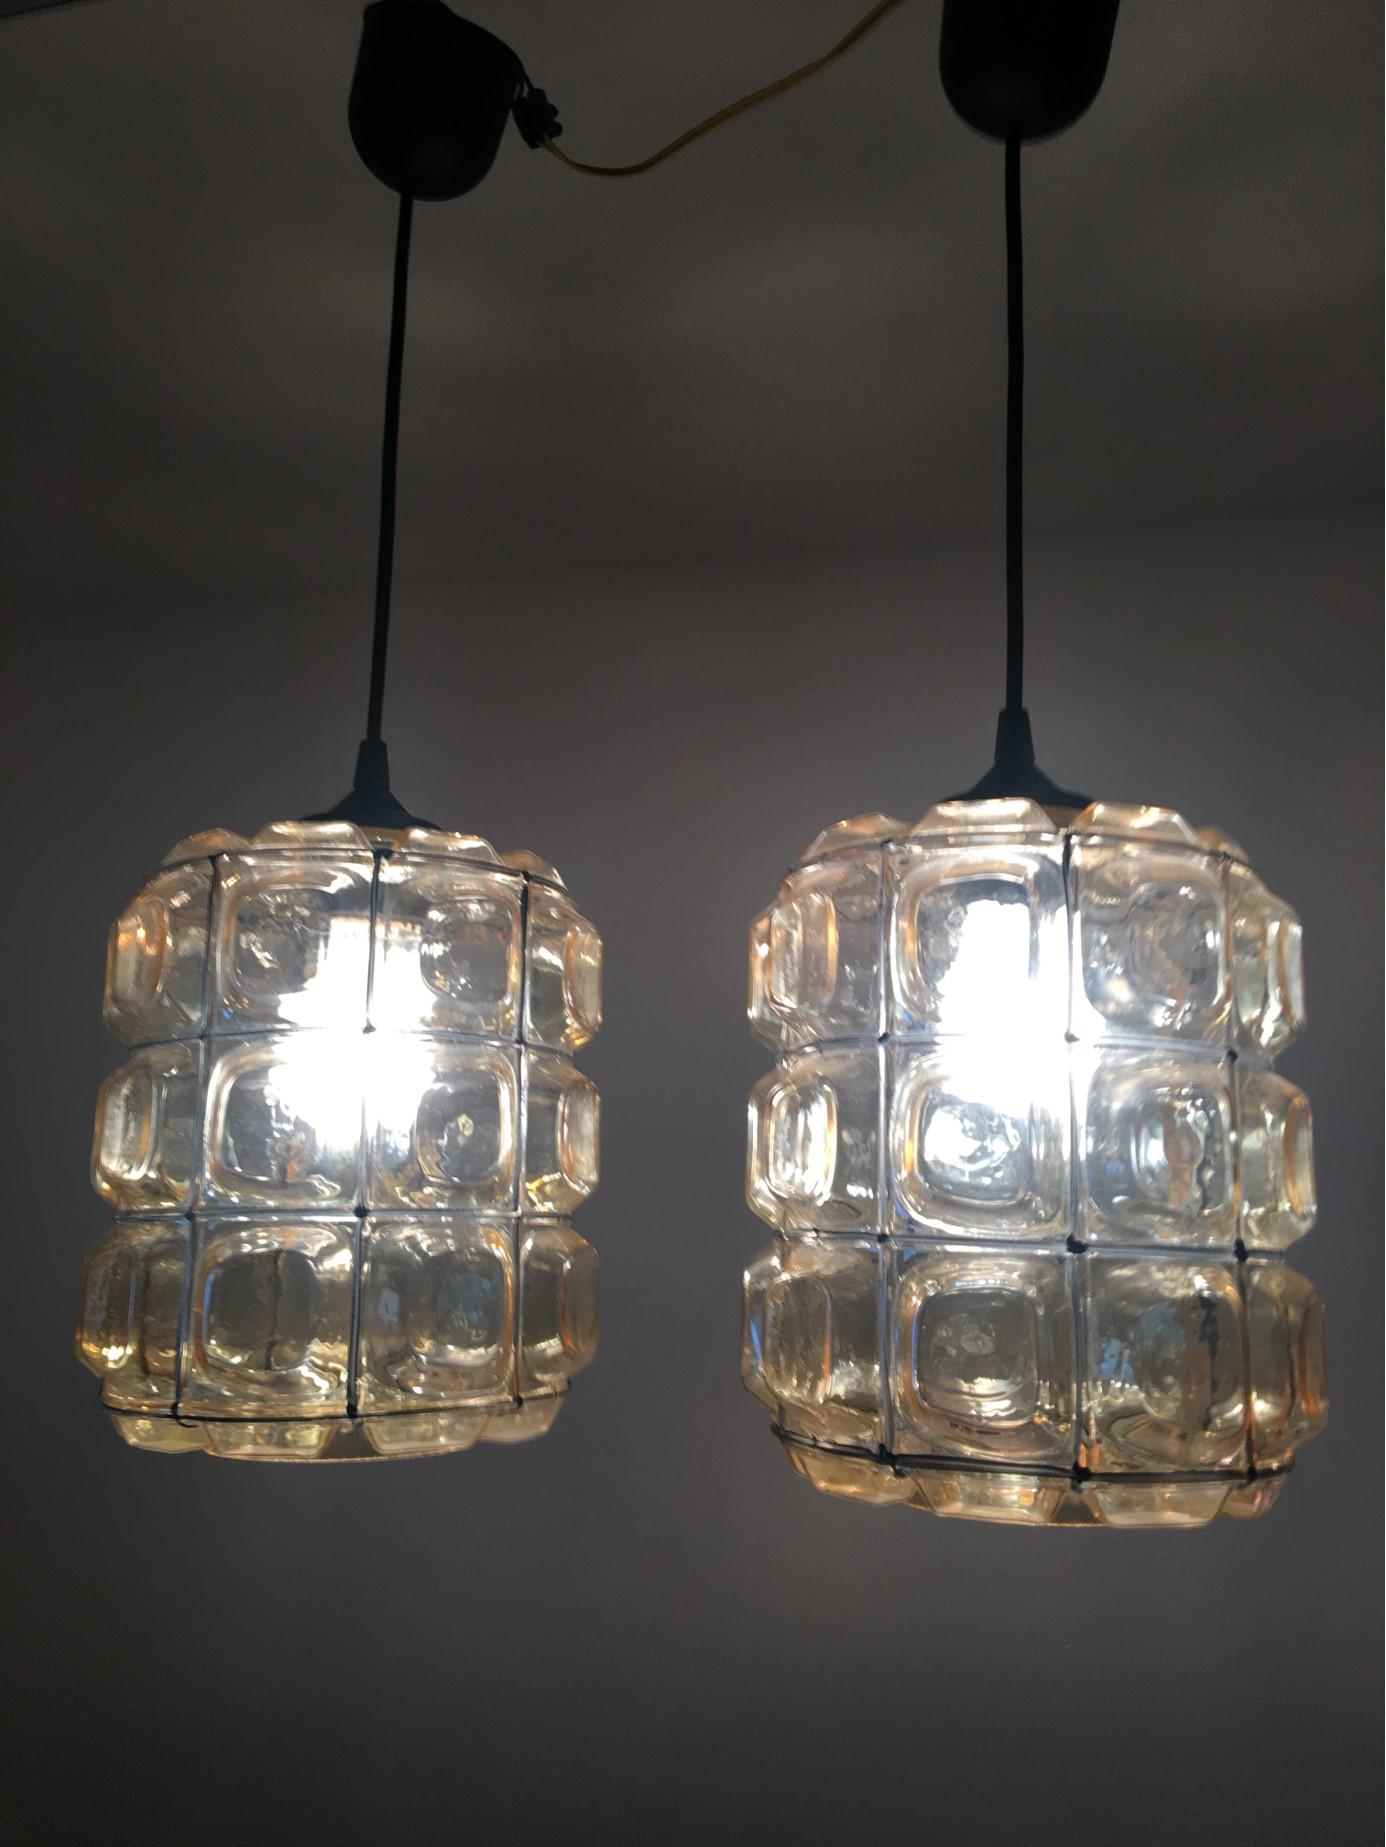 This nice pair of Limburg style lamps from Germany can be adjusted to a height between 15 to 35 inches depending on your personal needs. This pretty pair of lights require 3 E 27 European Edison bulbs each up to 60 watt. They are sold at a great